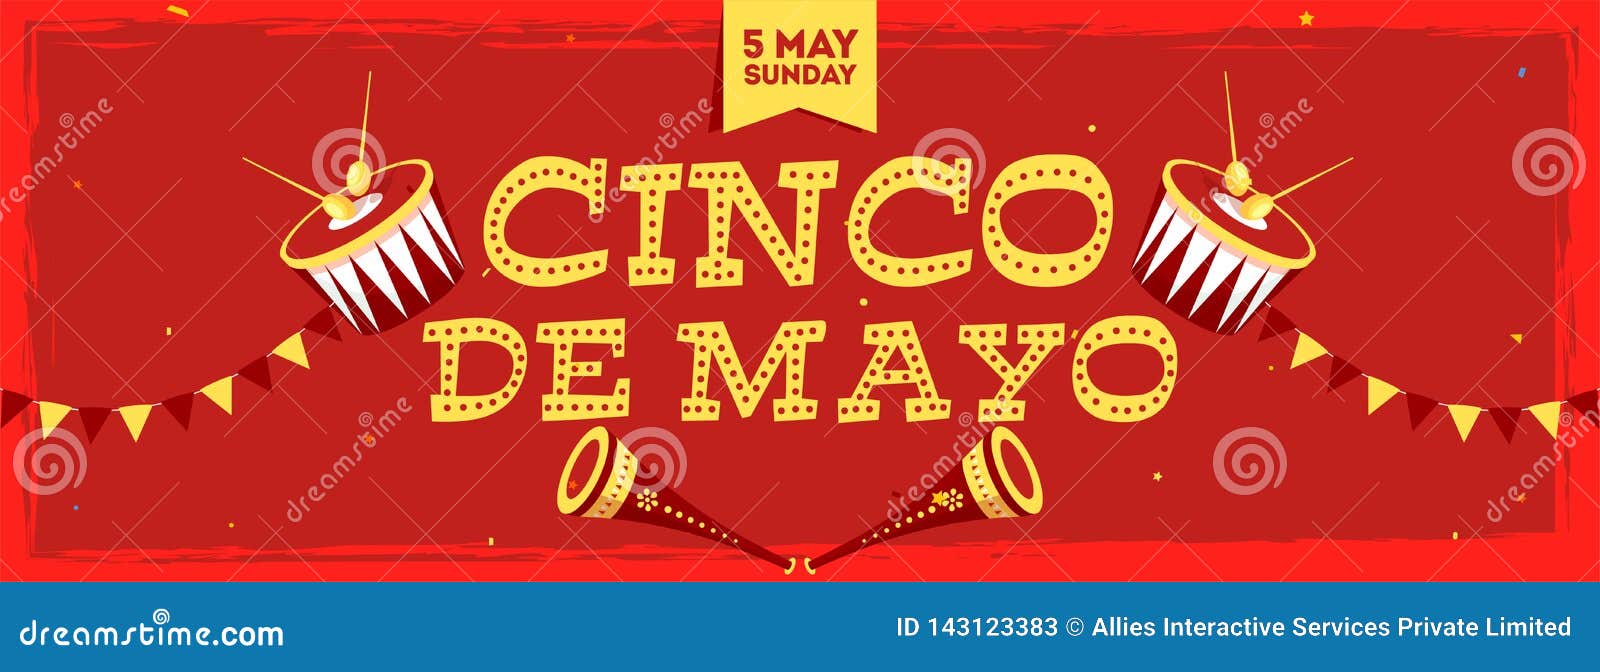 Cinco De Mayo Celebration Header Banner or Poster with Date of 5 May